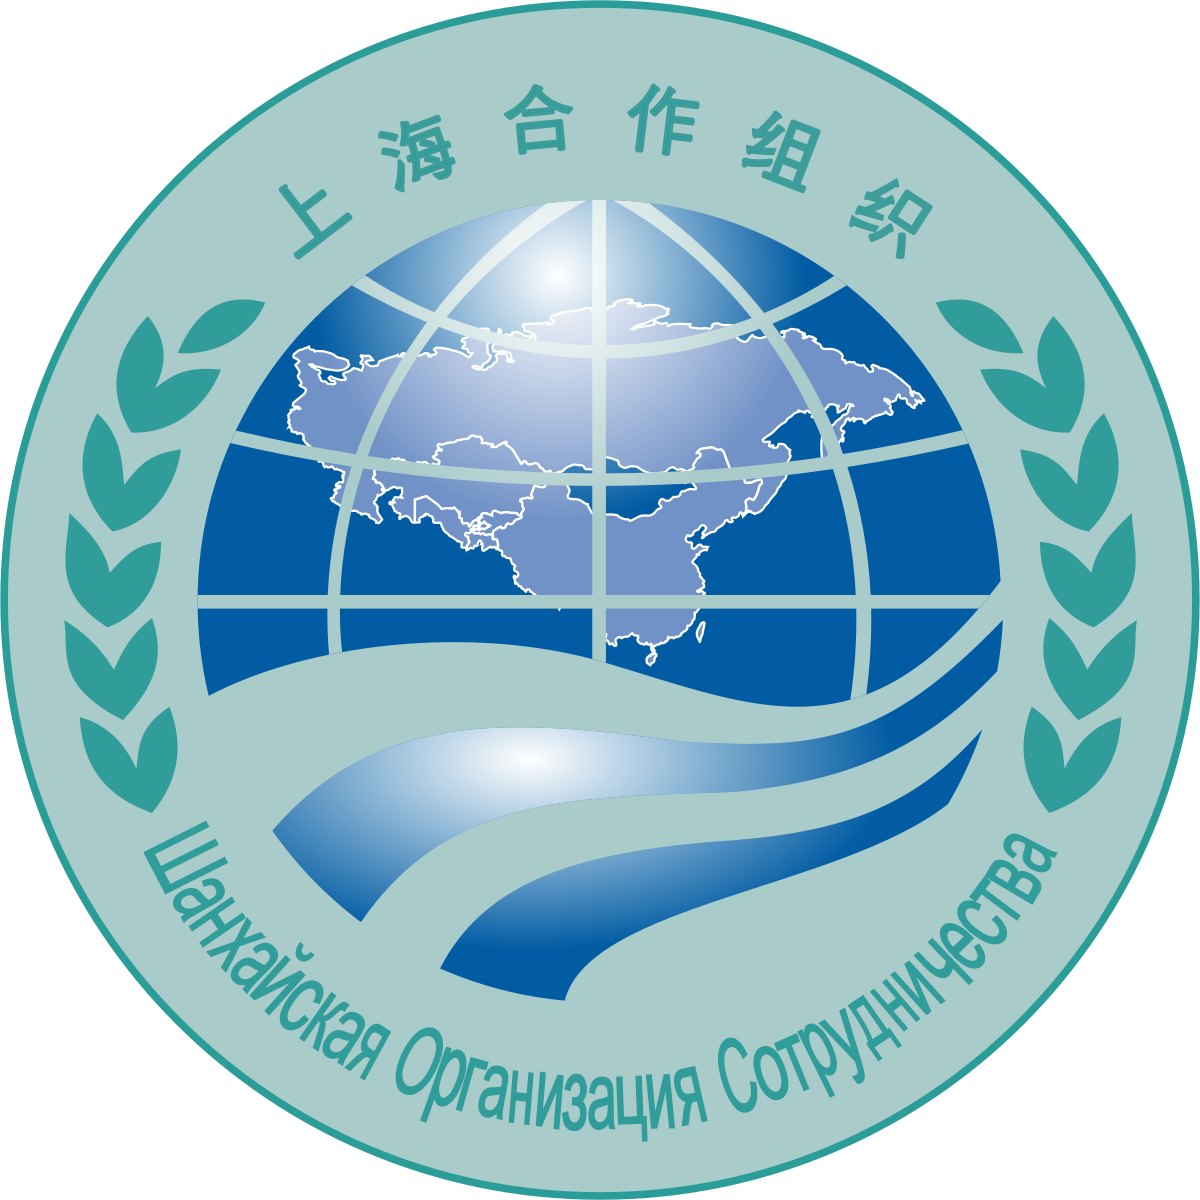 SCO's role in ensuring sustainable growth in region emphasized